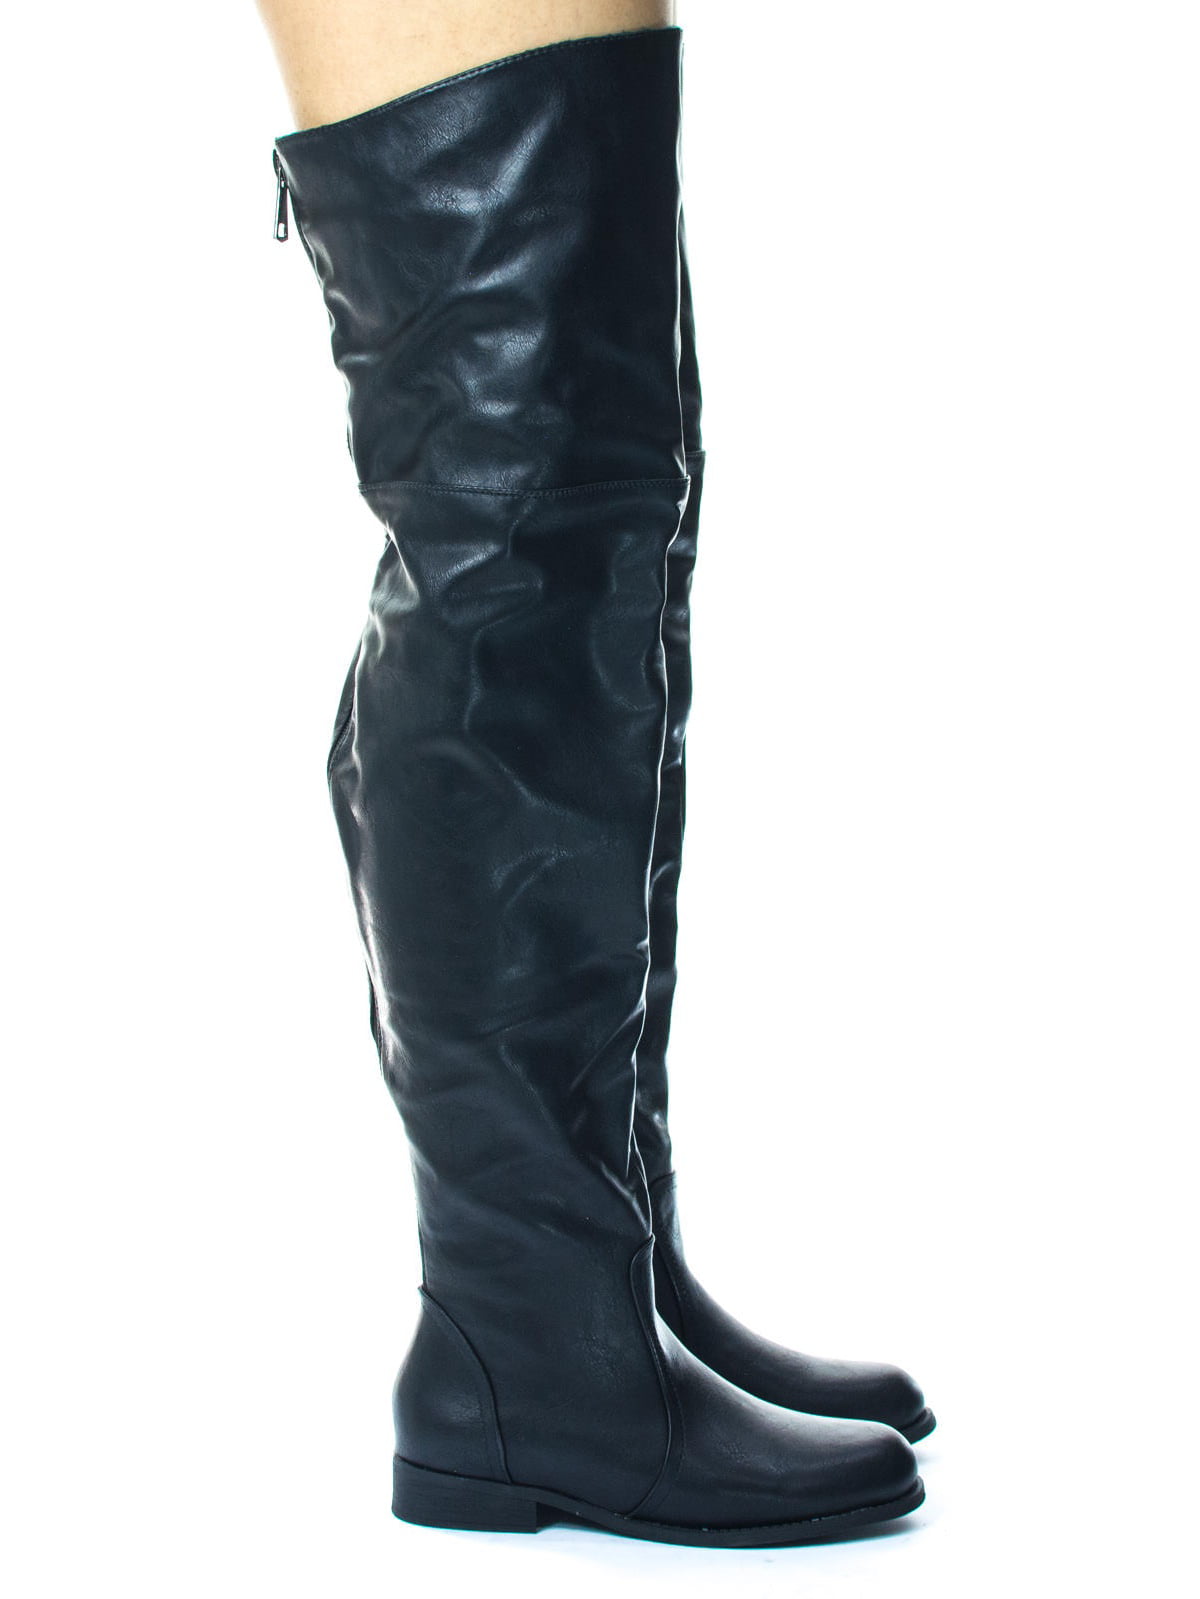 extra wide riding boots equestrian